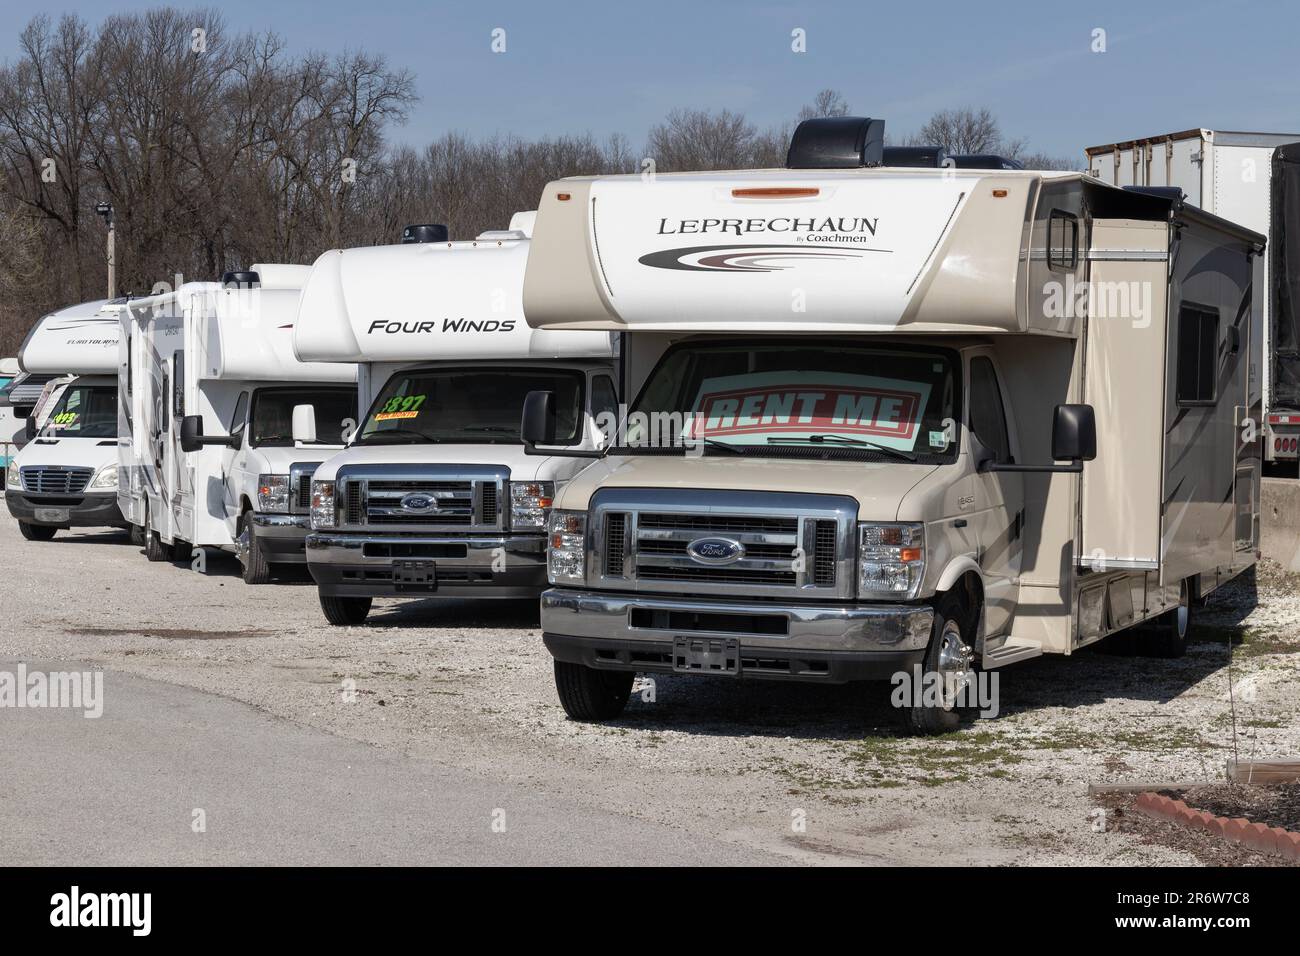 Lafayette - April 9, 2023: RV Motorhomes for rent at a dealership. Renting a motorhome is a cost effective way to see the country. Stock Photo